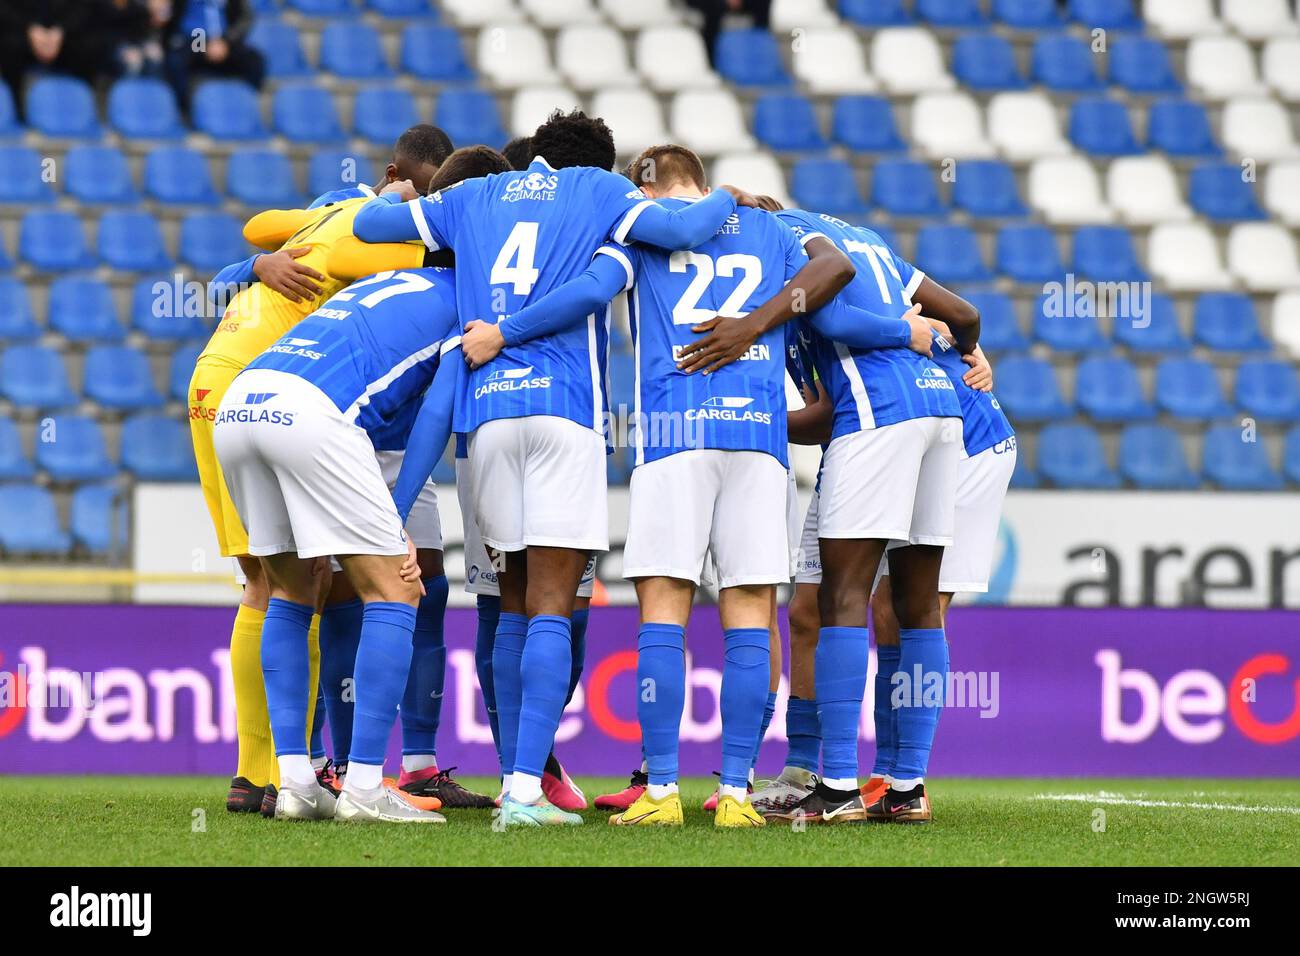 Jong Genk's players pictured before a soccer match between Jong Genk (U23) and SL16 (Standard U23), Sunday 19 February 2023 in Lommel, a postponed game of day 19 of the 2022-2023 'Challenger Pro League' 1B second division of the Belgian championship. BELGA PHOTO JILL DELSAUX Stock Photo